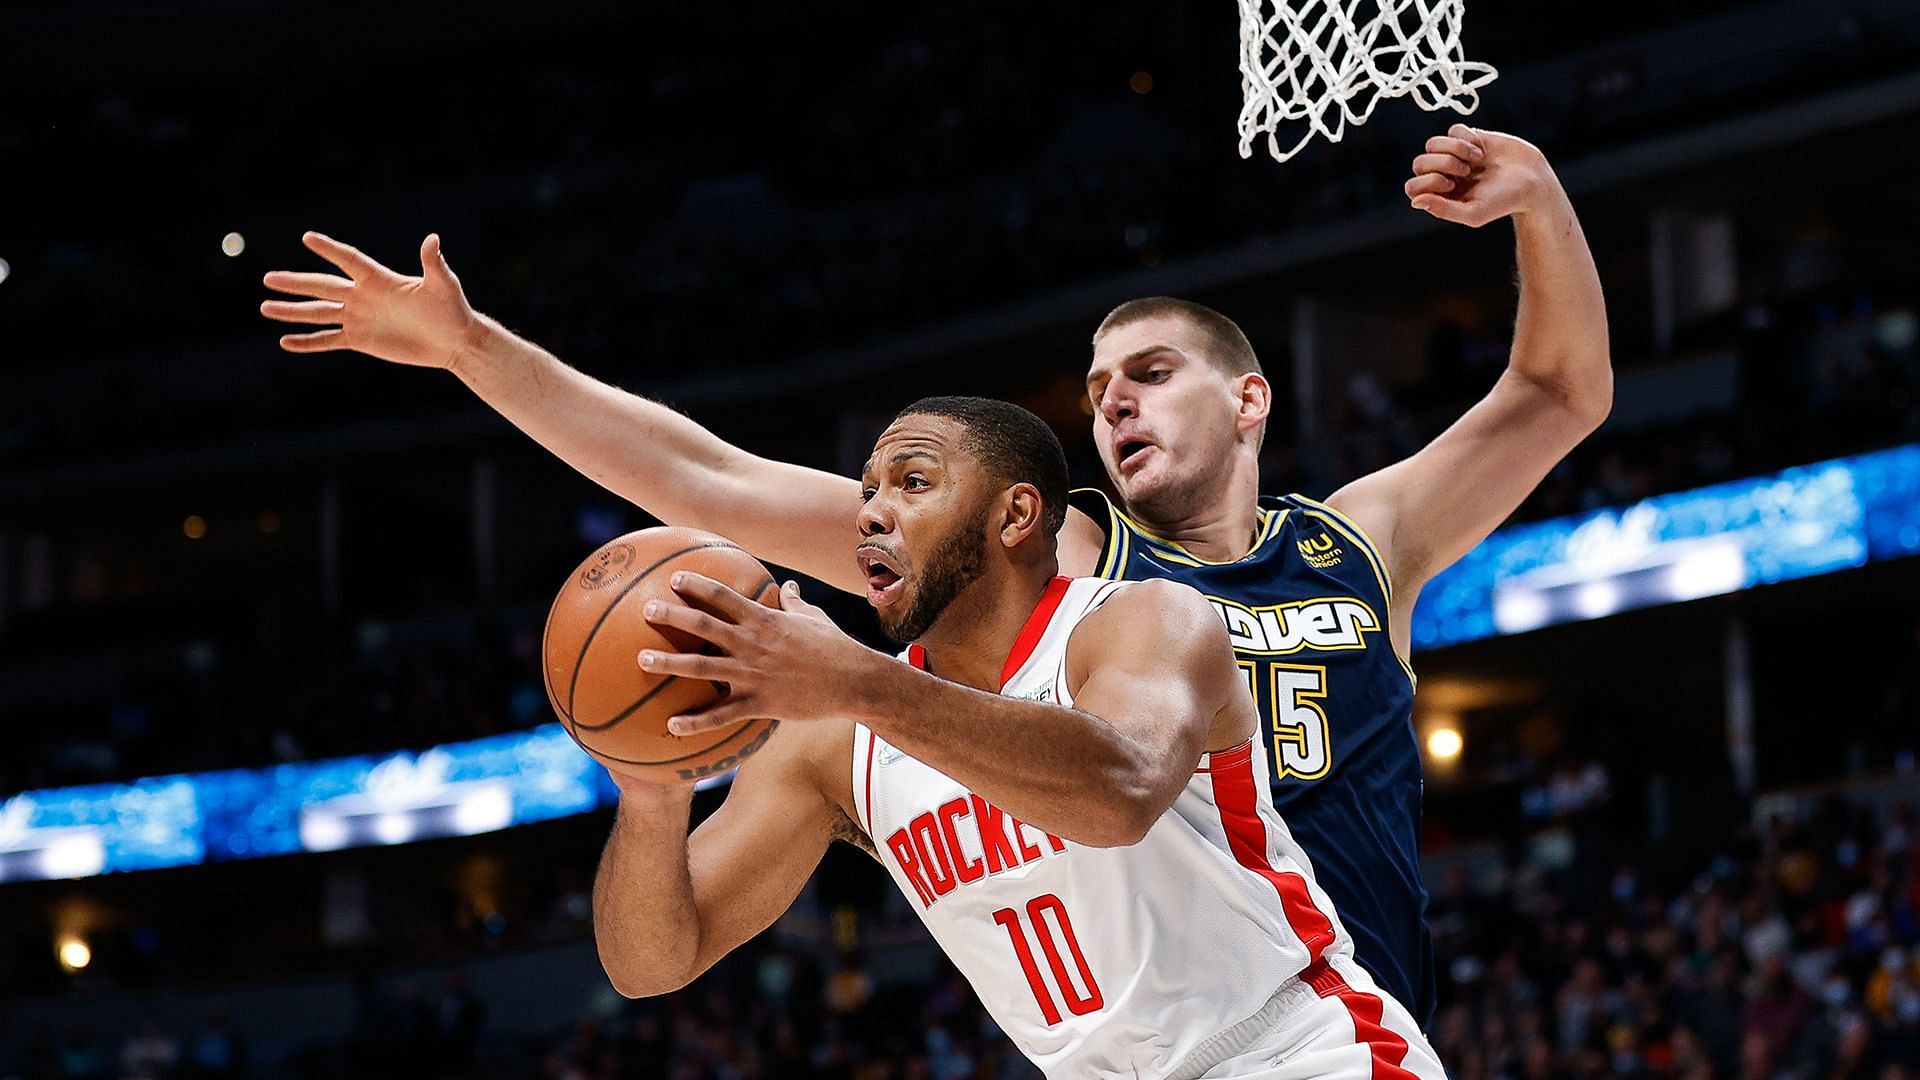 The Denver Nuggets will open their New Year with a rematch against the Houston Rockets. [Photo: NBA.com]